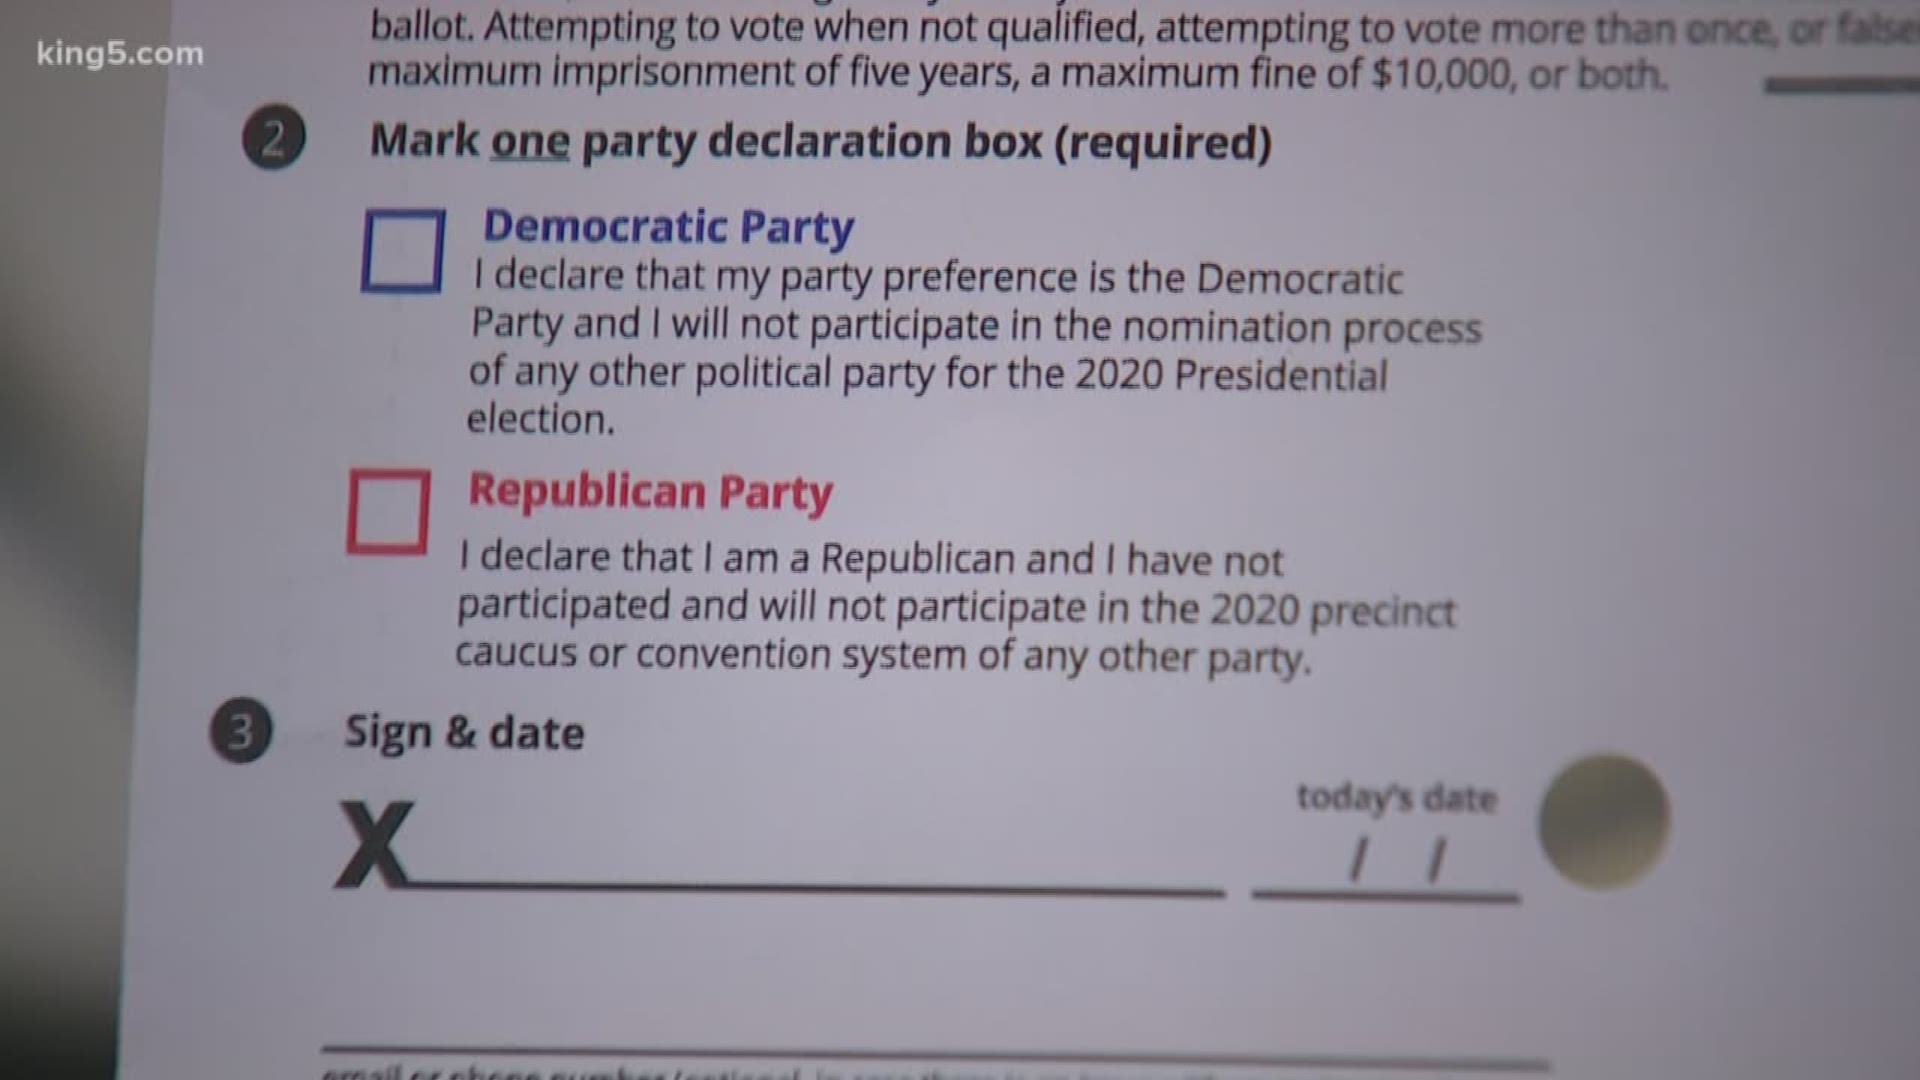 The Washington presidential primary is March 10, and voters are required to identify their party affiliation in order for votes to be counted.